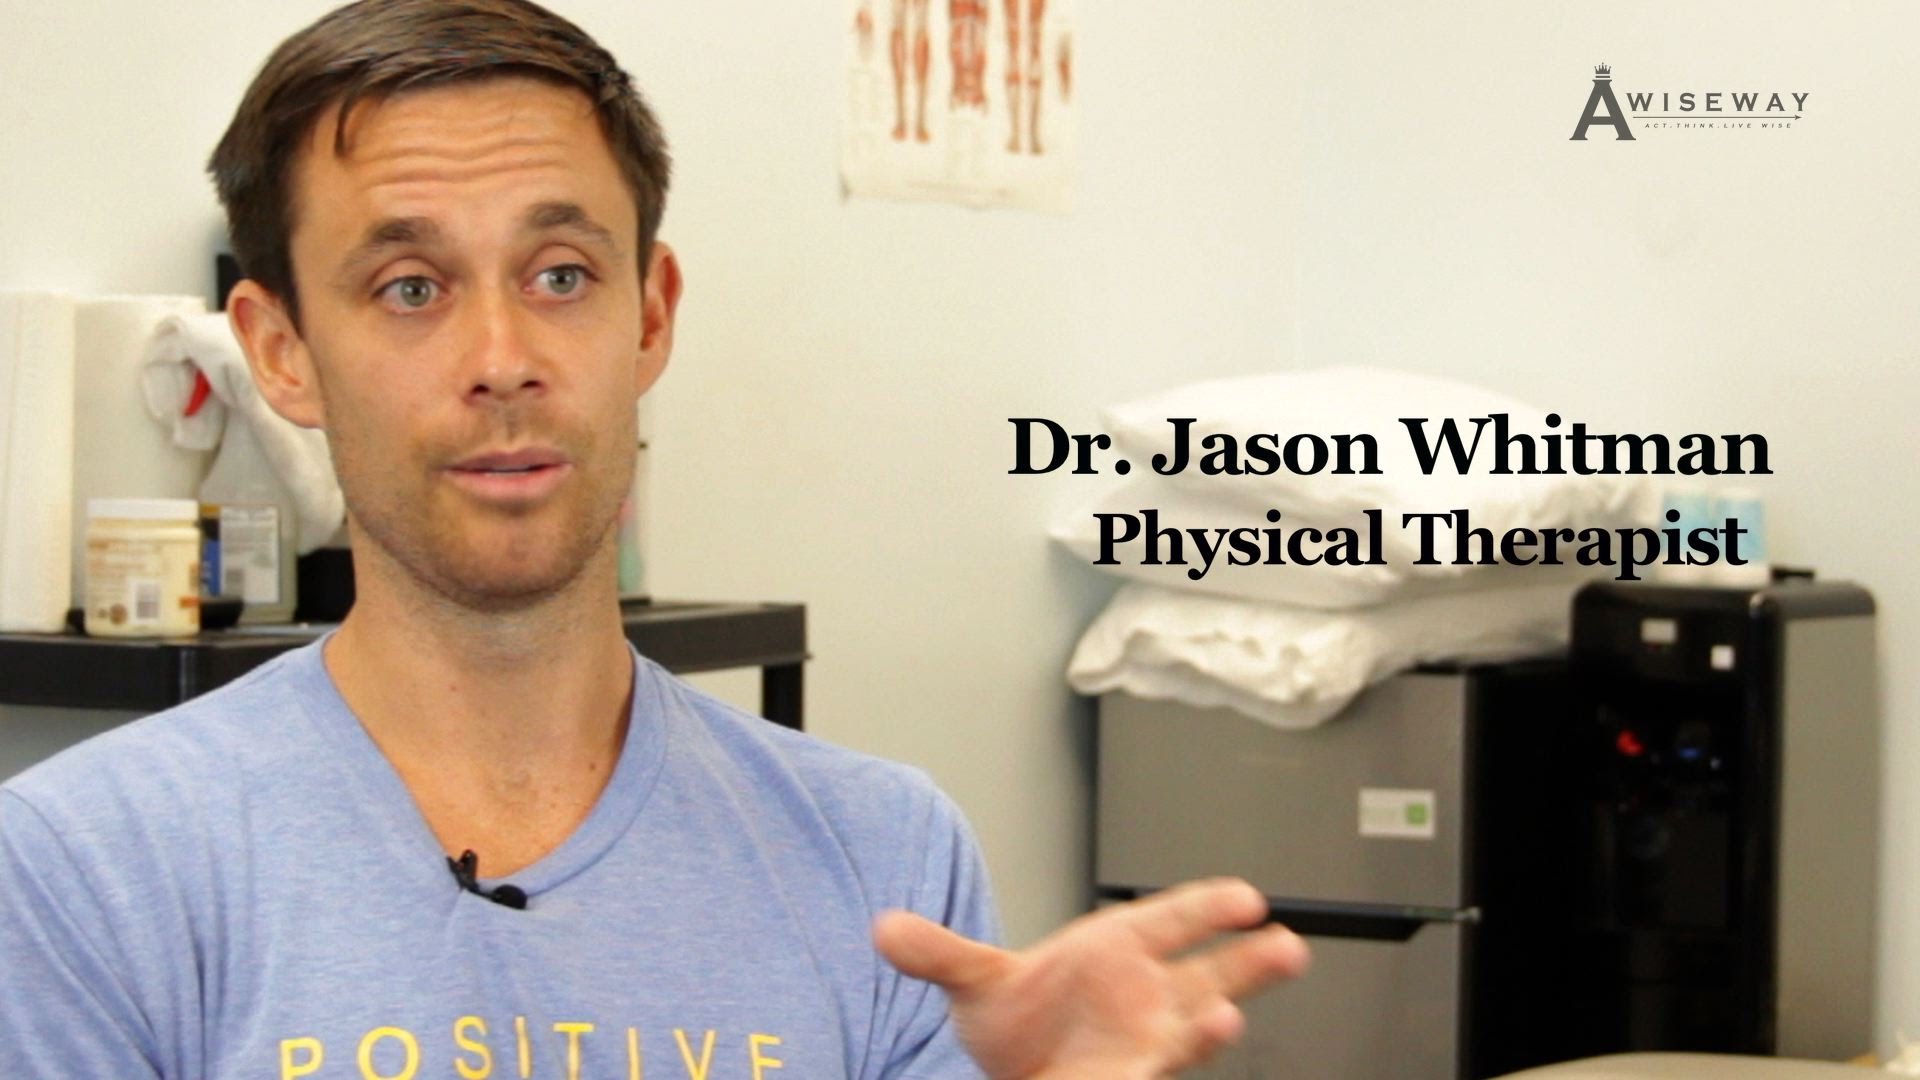 Physical Therapist Speaks About How He Loves the Patient Interaction